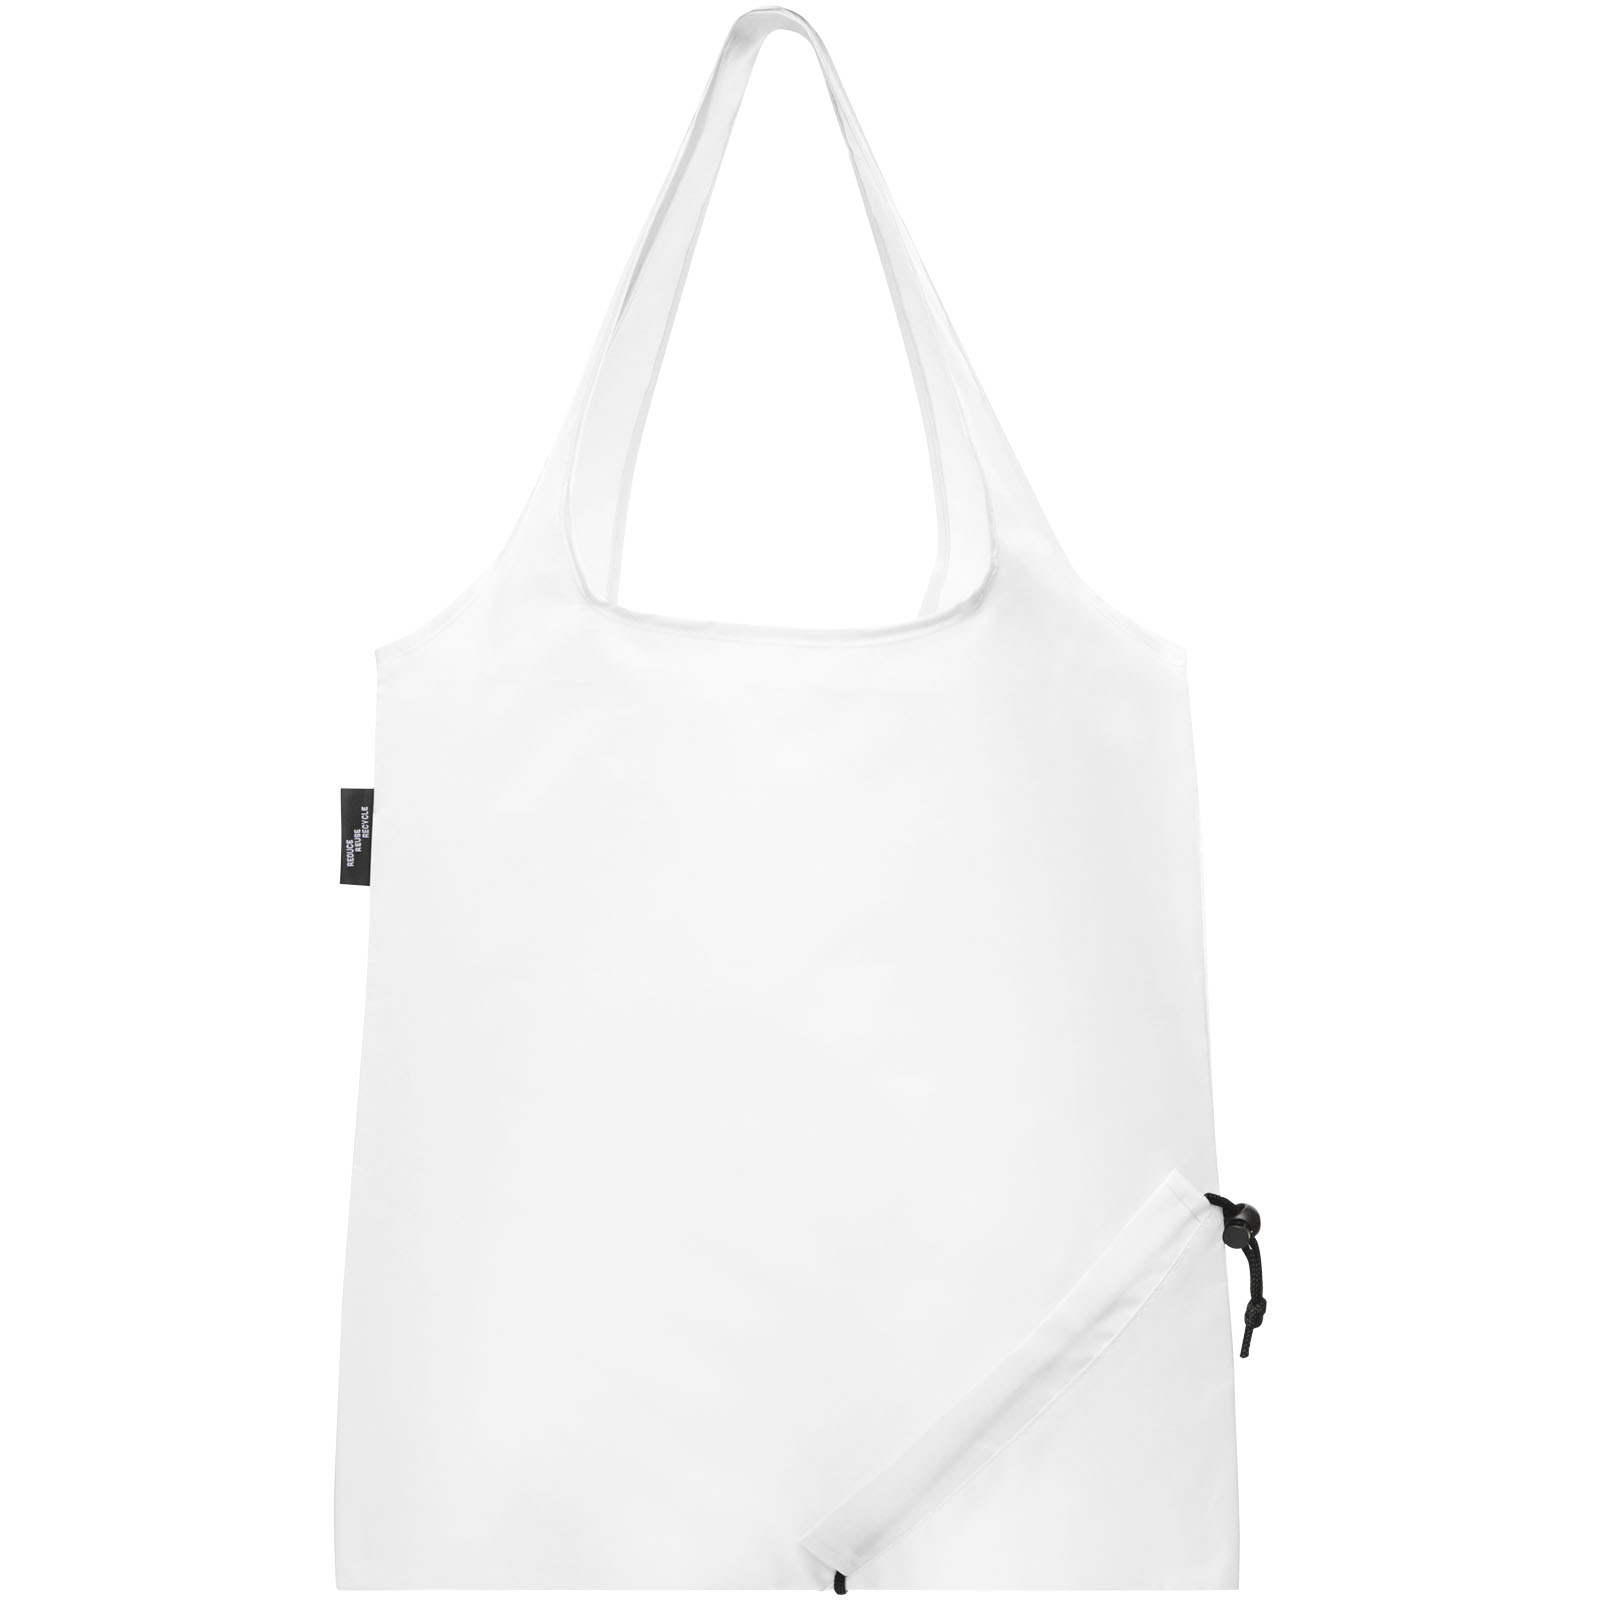 Advertising Shopping & Tote Bags - Sabia RPET foldable tote bag 7L - 2